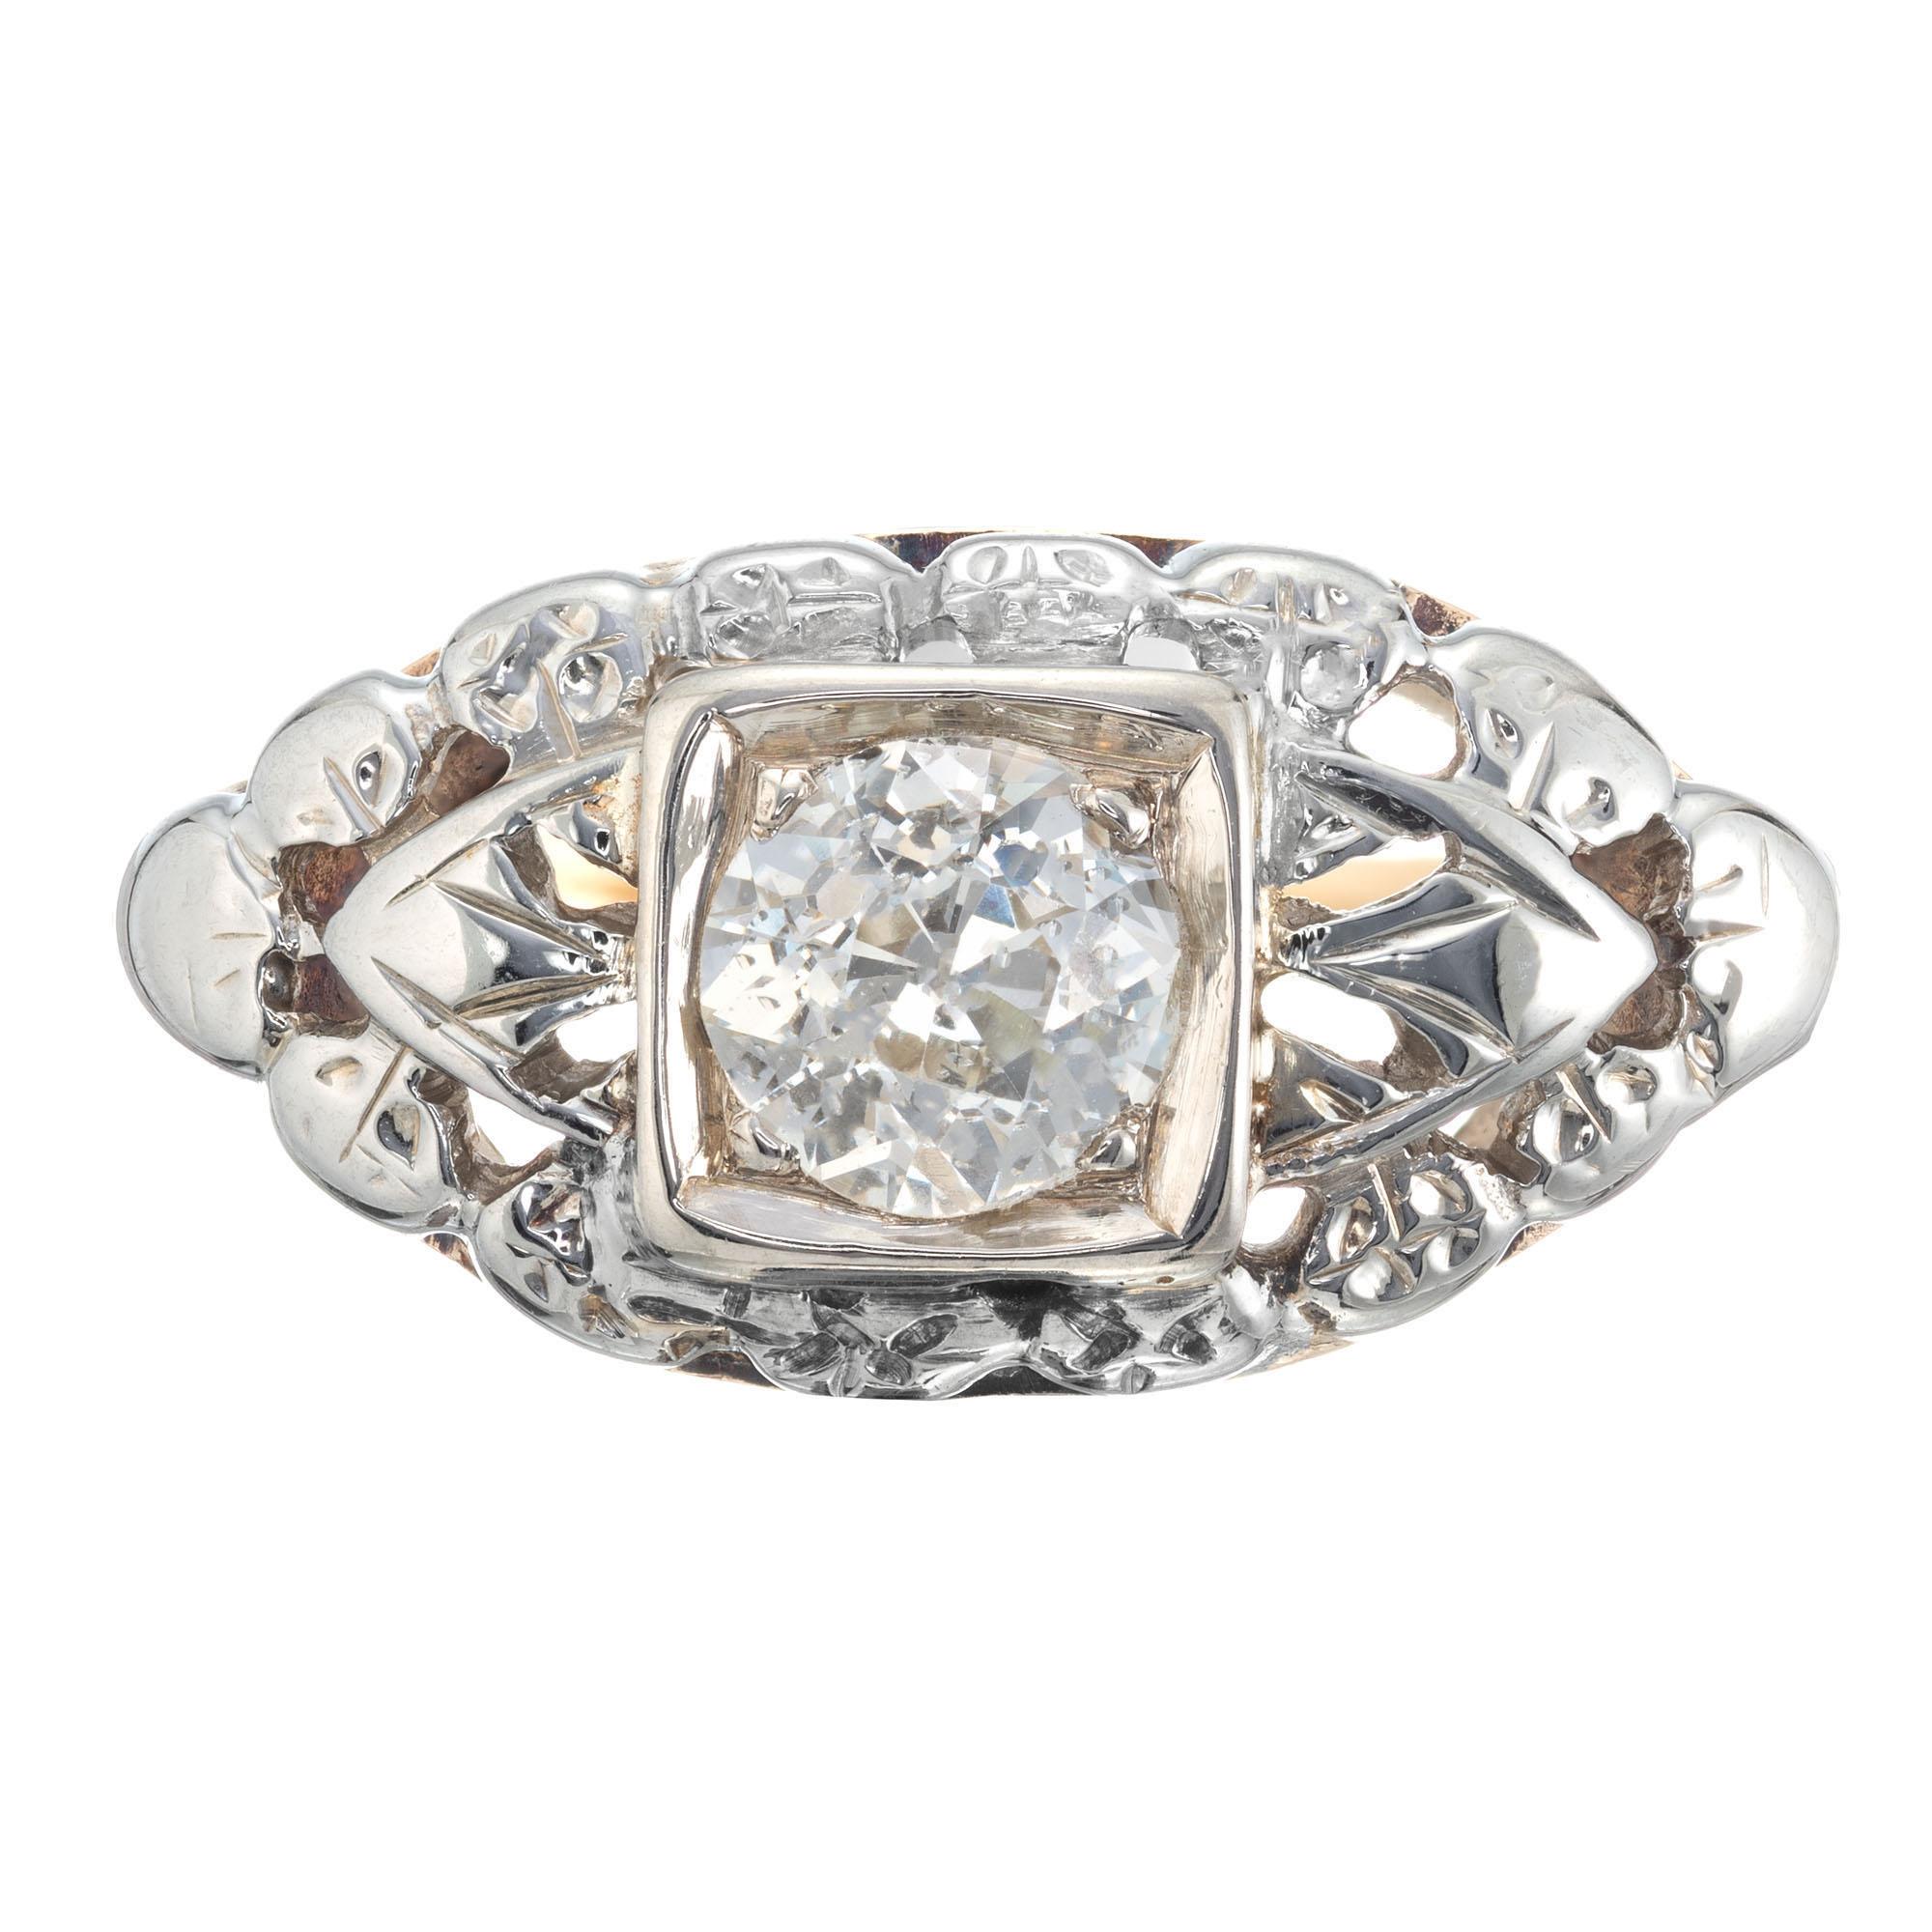 Art Deco diamond engagement ring. .47ct old European center stone in a 18k white gold top with yellow gold band setting. EGL certified. Circa 1920-1929.

1 old European cut .47ct H to I color and SI3 clarity. 4.80x4.78x3.17mm EGL cert#